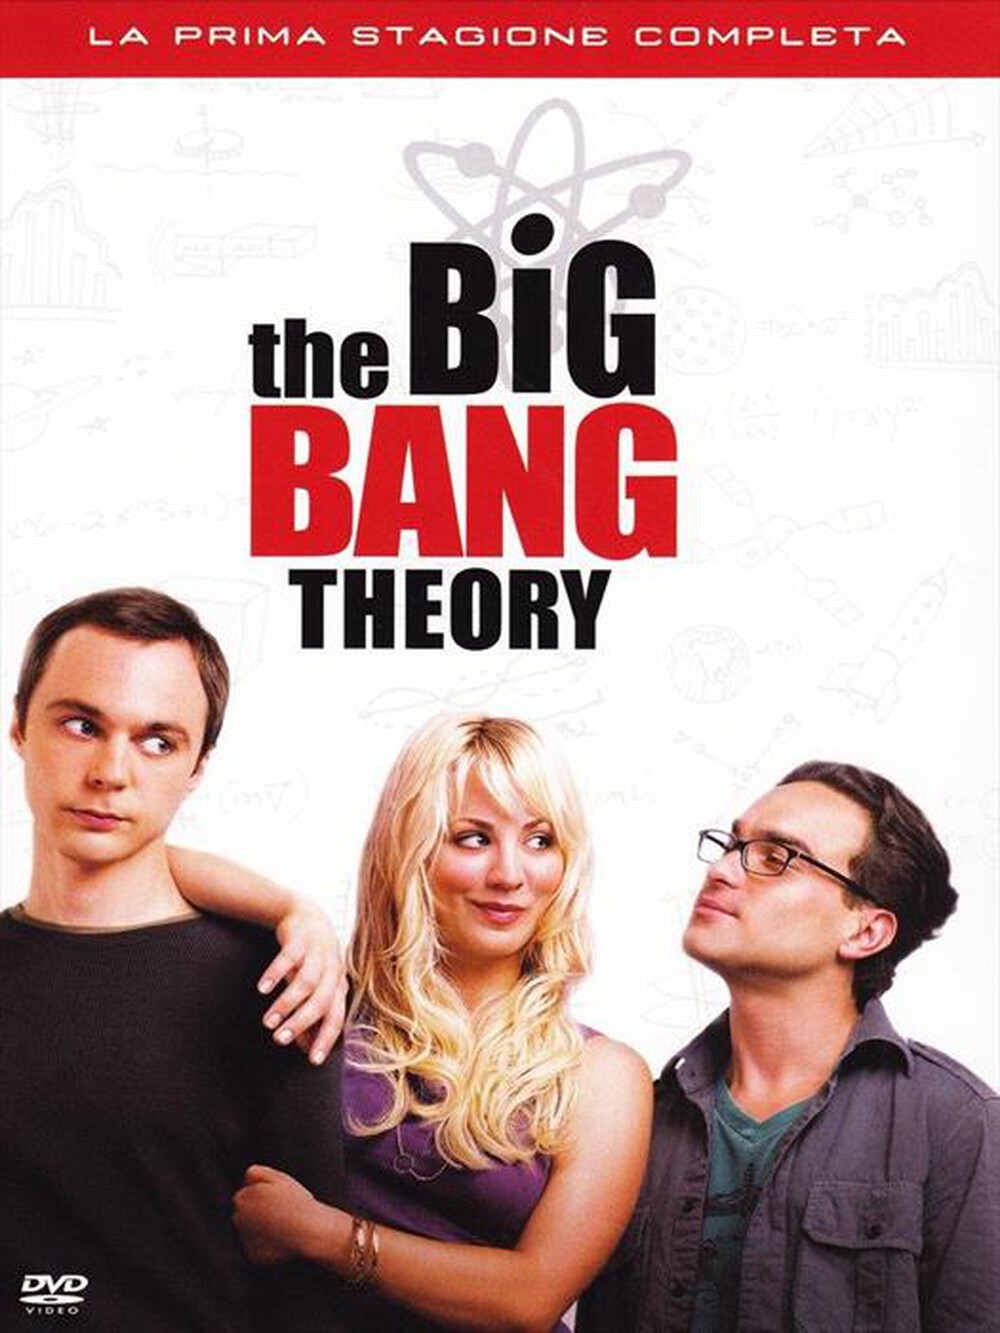 "WARNER HOME VIDEO - Big Bang Theory (The) - Stagione 01 (3 Dvd)"